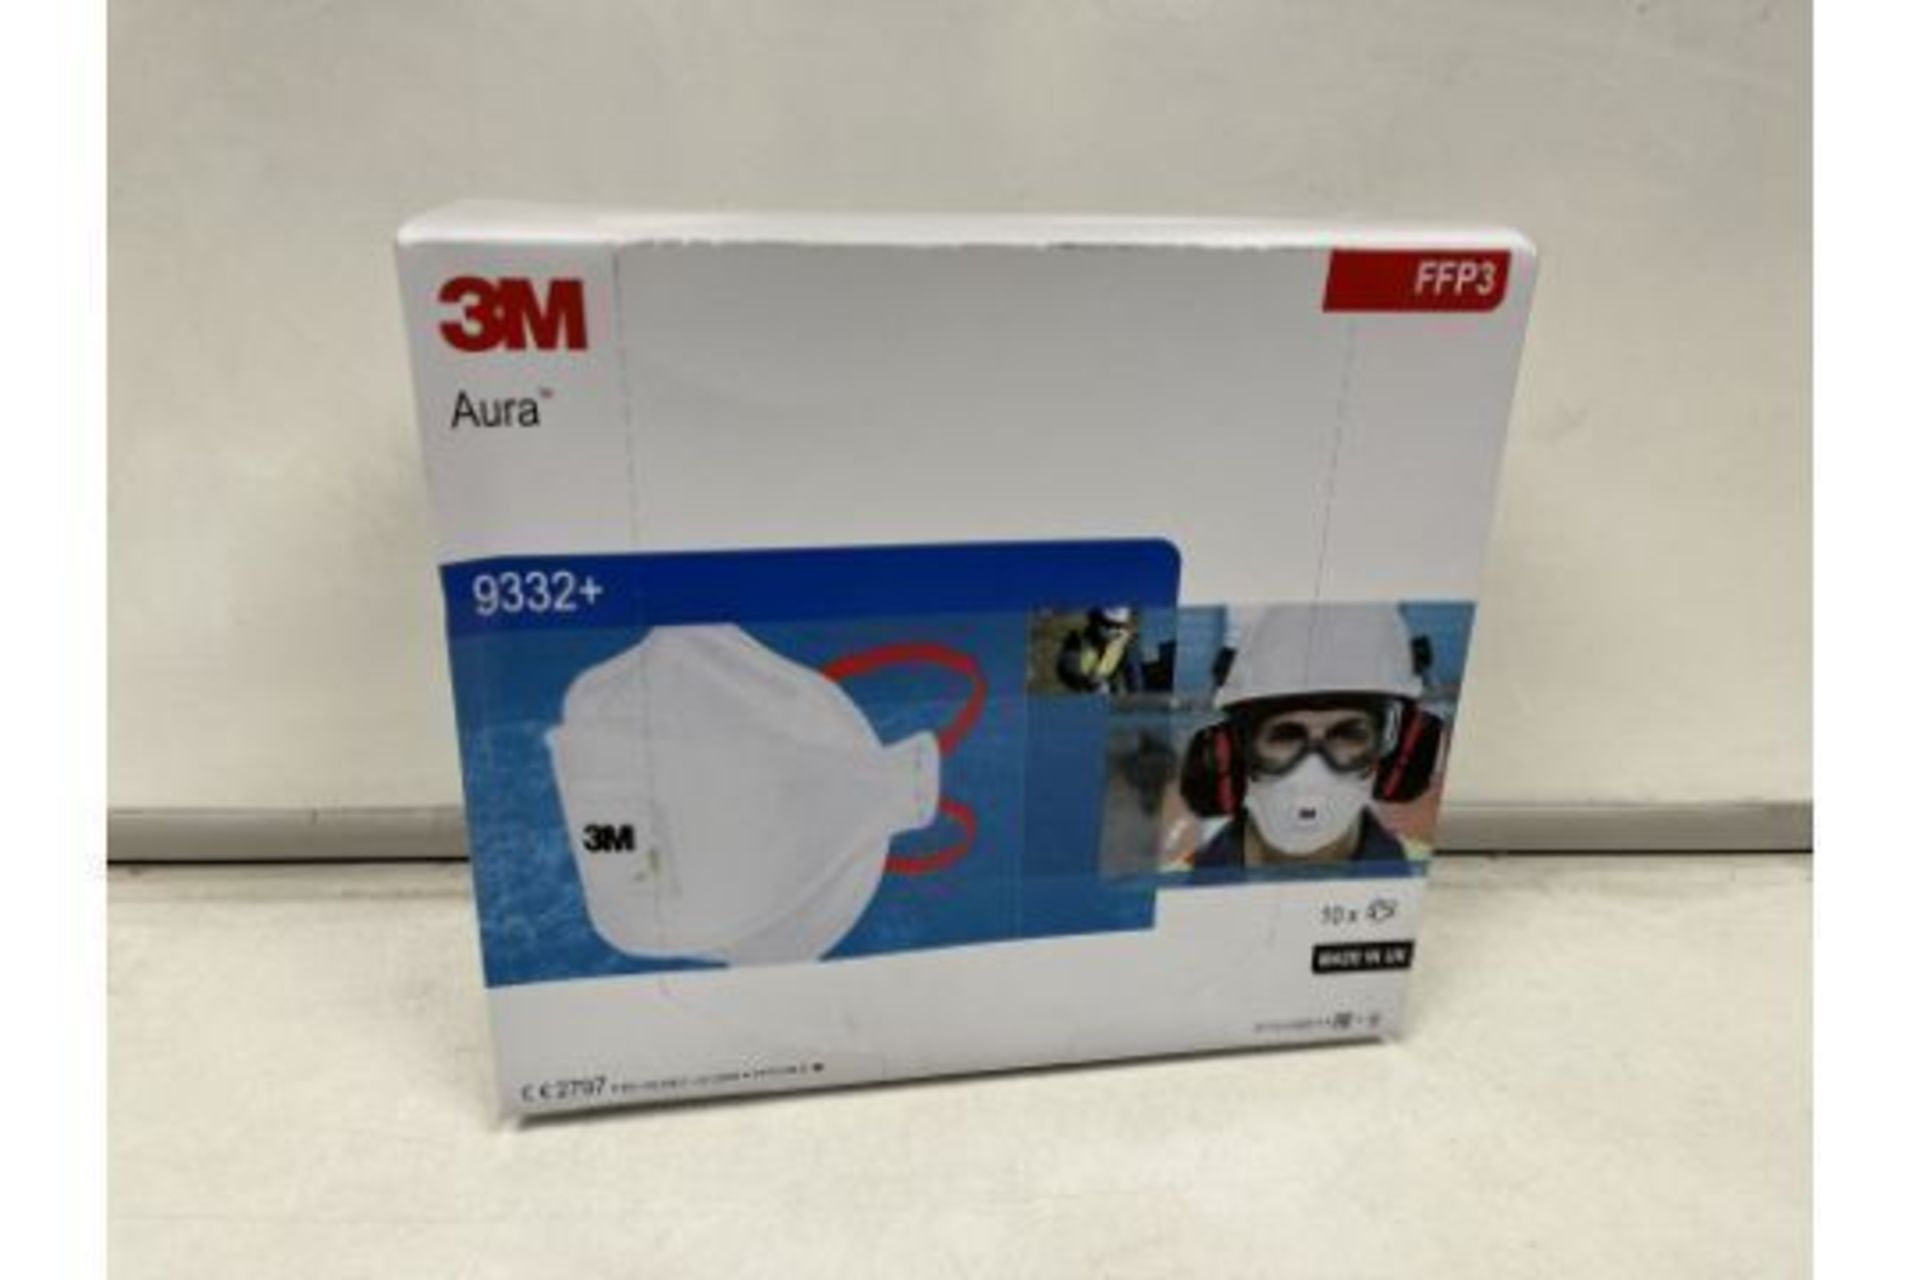 TRADE LOT 60 X BRAND NEW PACKS OF 10 3M AURA 9332 DISPOSABLE MASK, VALVED, WHITE FFP3, FILTERS - Image 4 of 4